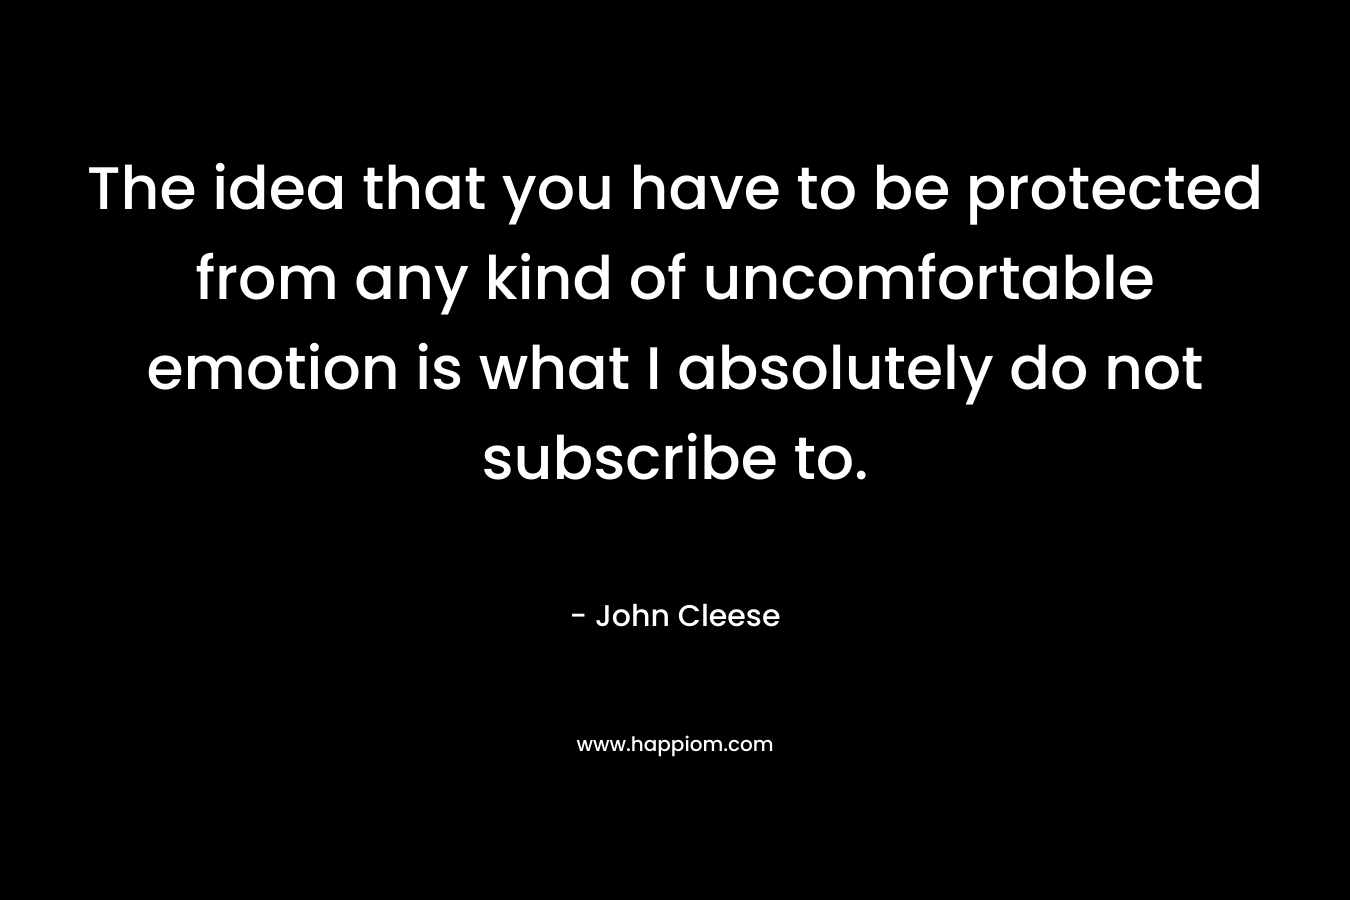 The idea that you have to be protected from any kind of uncomfortable emotion is what I absolutely do not subscribe to. – John Cleese